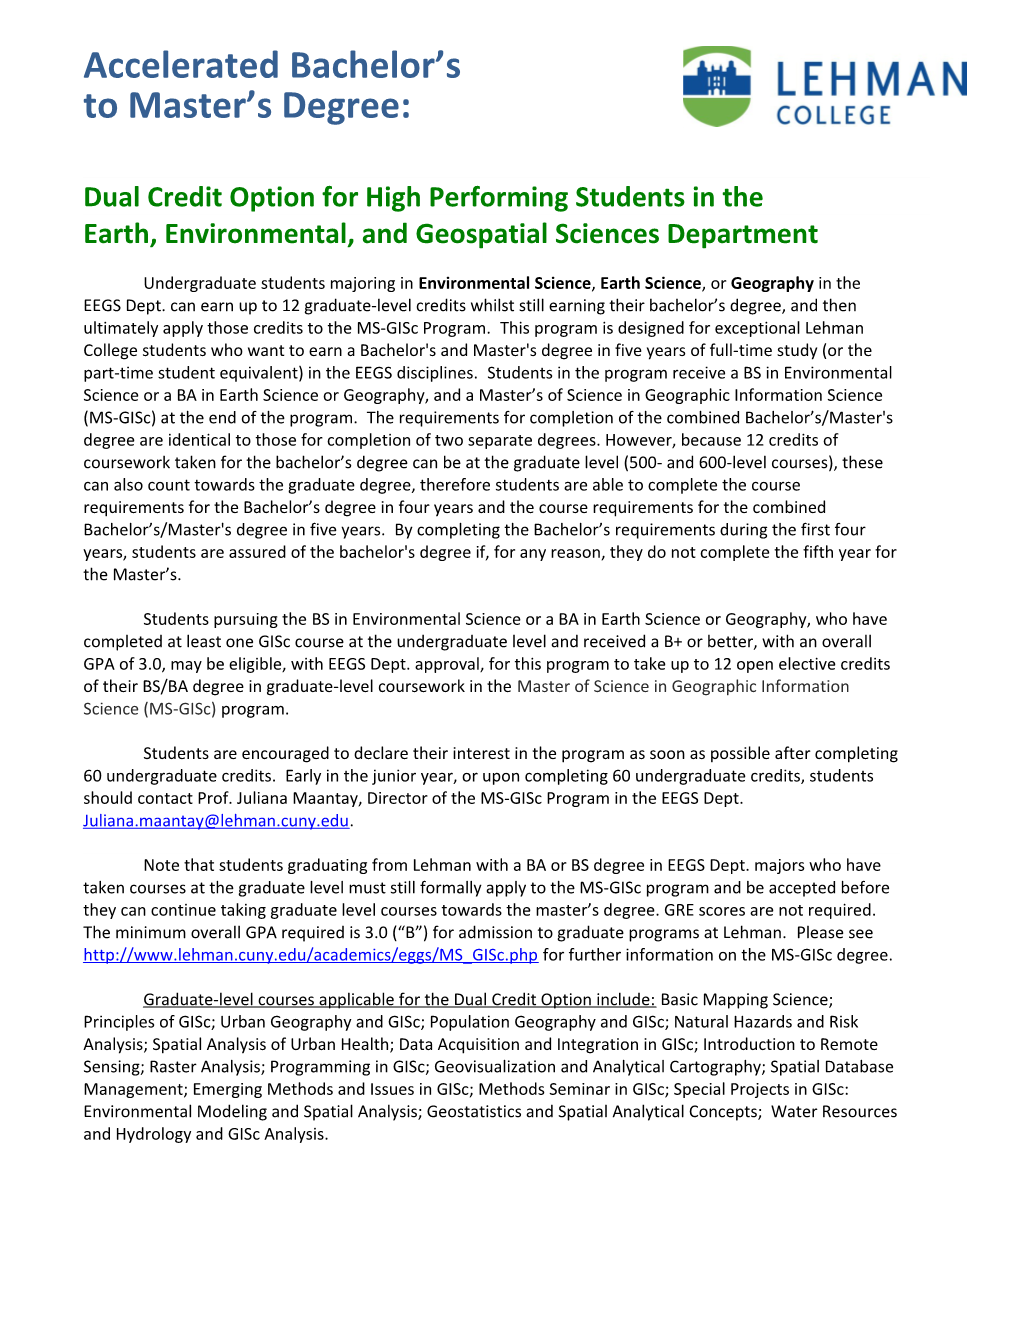 Dual Credit Option for High Performing Students in The